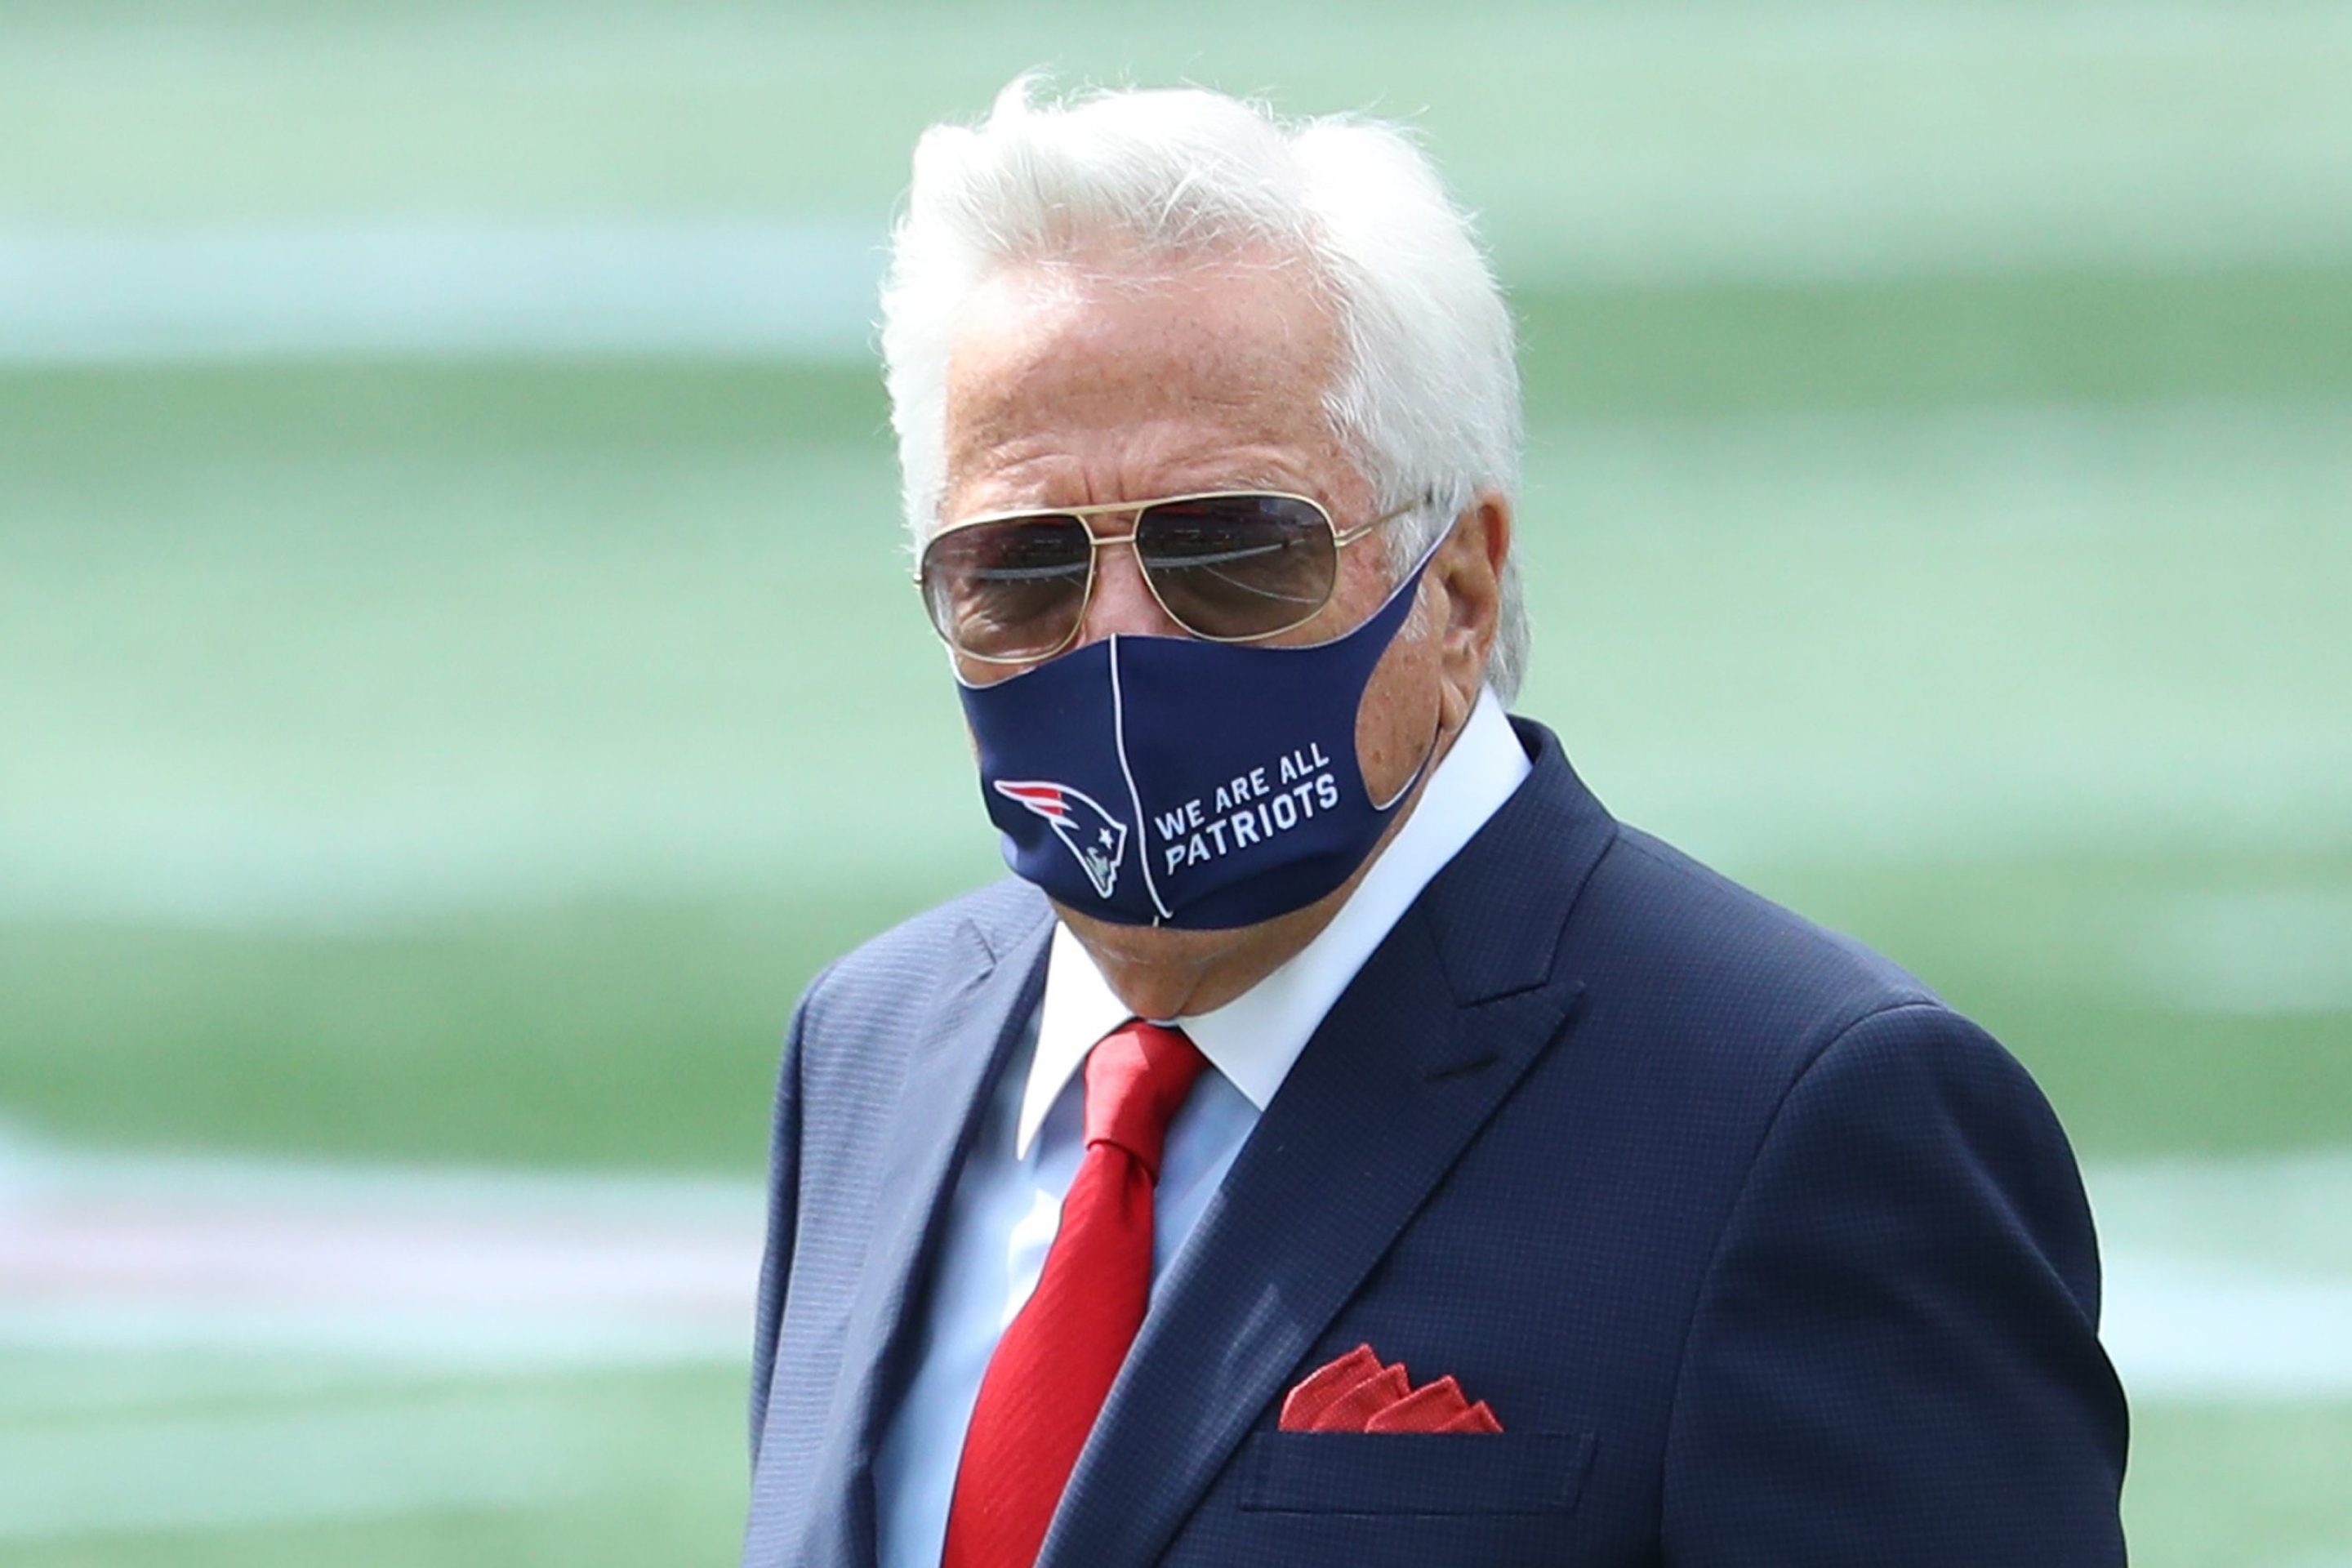 Patriots owner Robert Kraft wears a protective mask with "We Are All Patriots" stamped next to a Patriots logo.